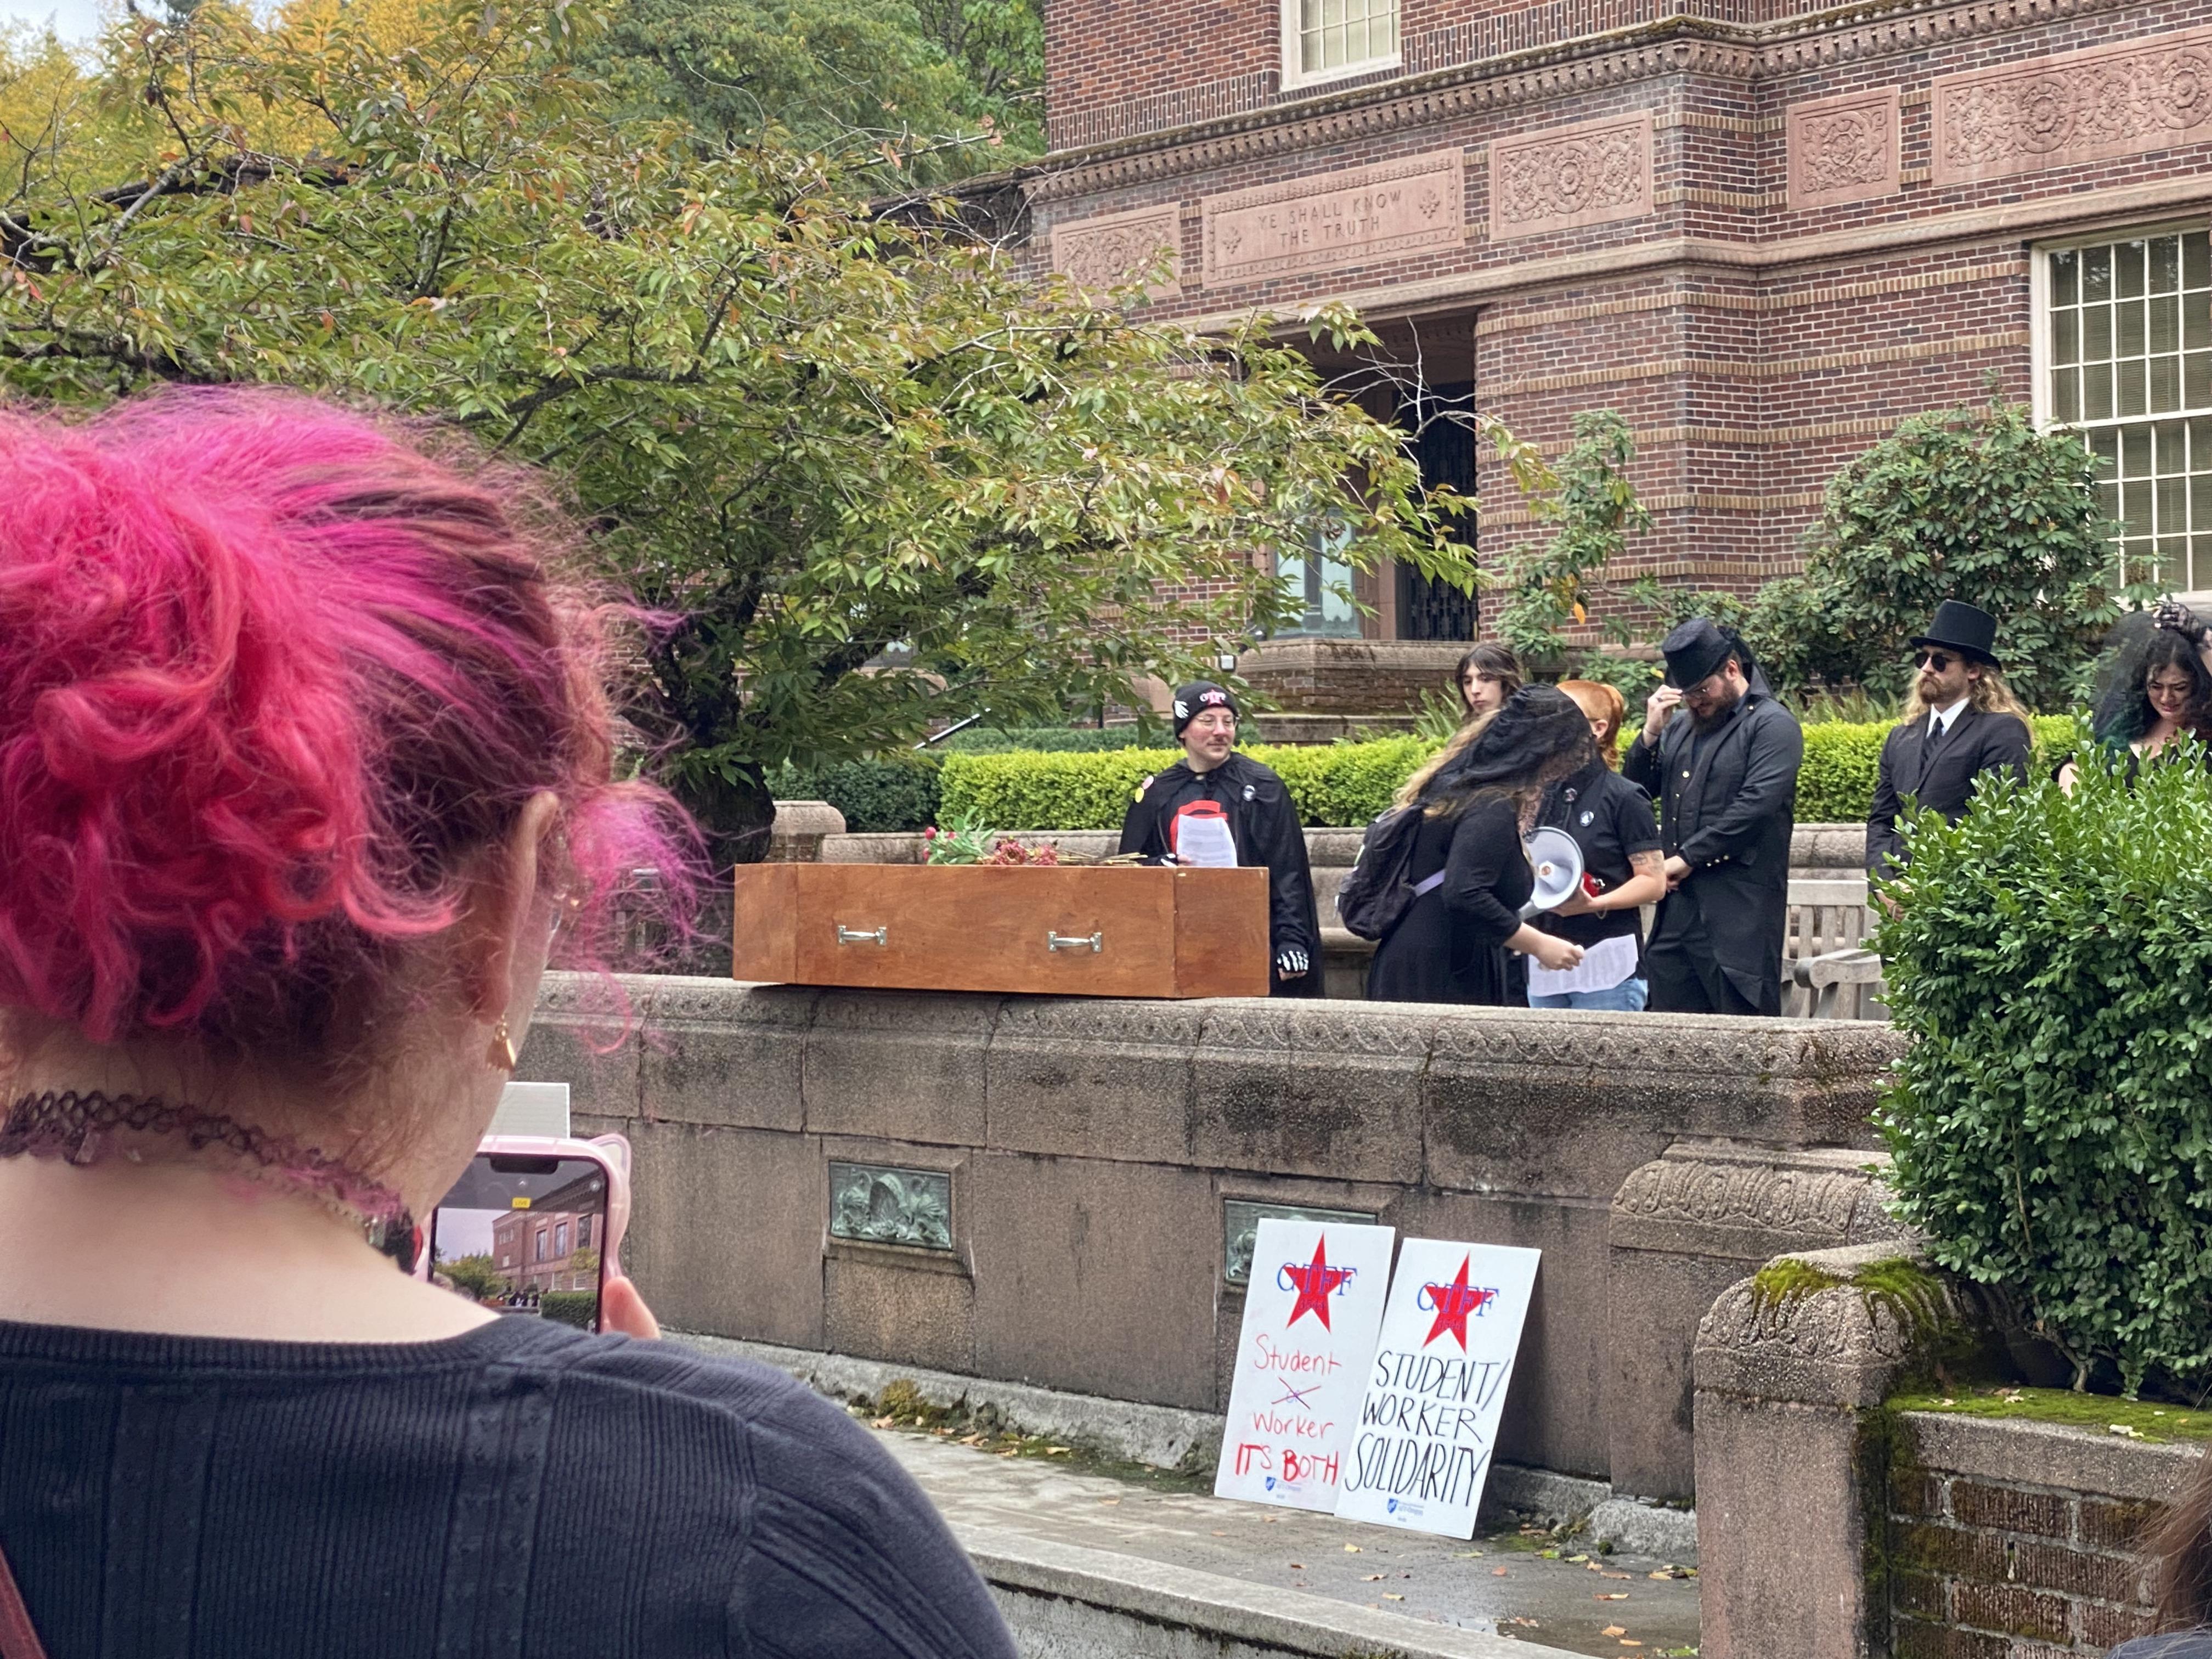 Members of the GTFF and UO Student Workers stand behind a wooden casket, dressed for a typical funeral wake. Multiple speeches were given, predominantly featuring testimony from graduate student workers about how their wages are incapable of covering the cost of living in Eugene. Two signs at the front read “Student or Worker[sic] It’s Both!” and “Student/Worker Solidarity”